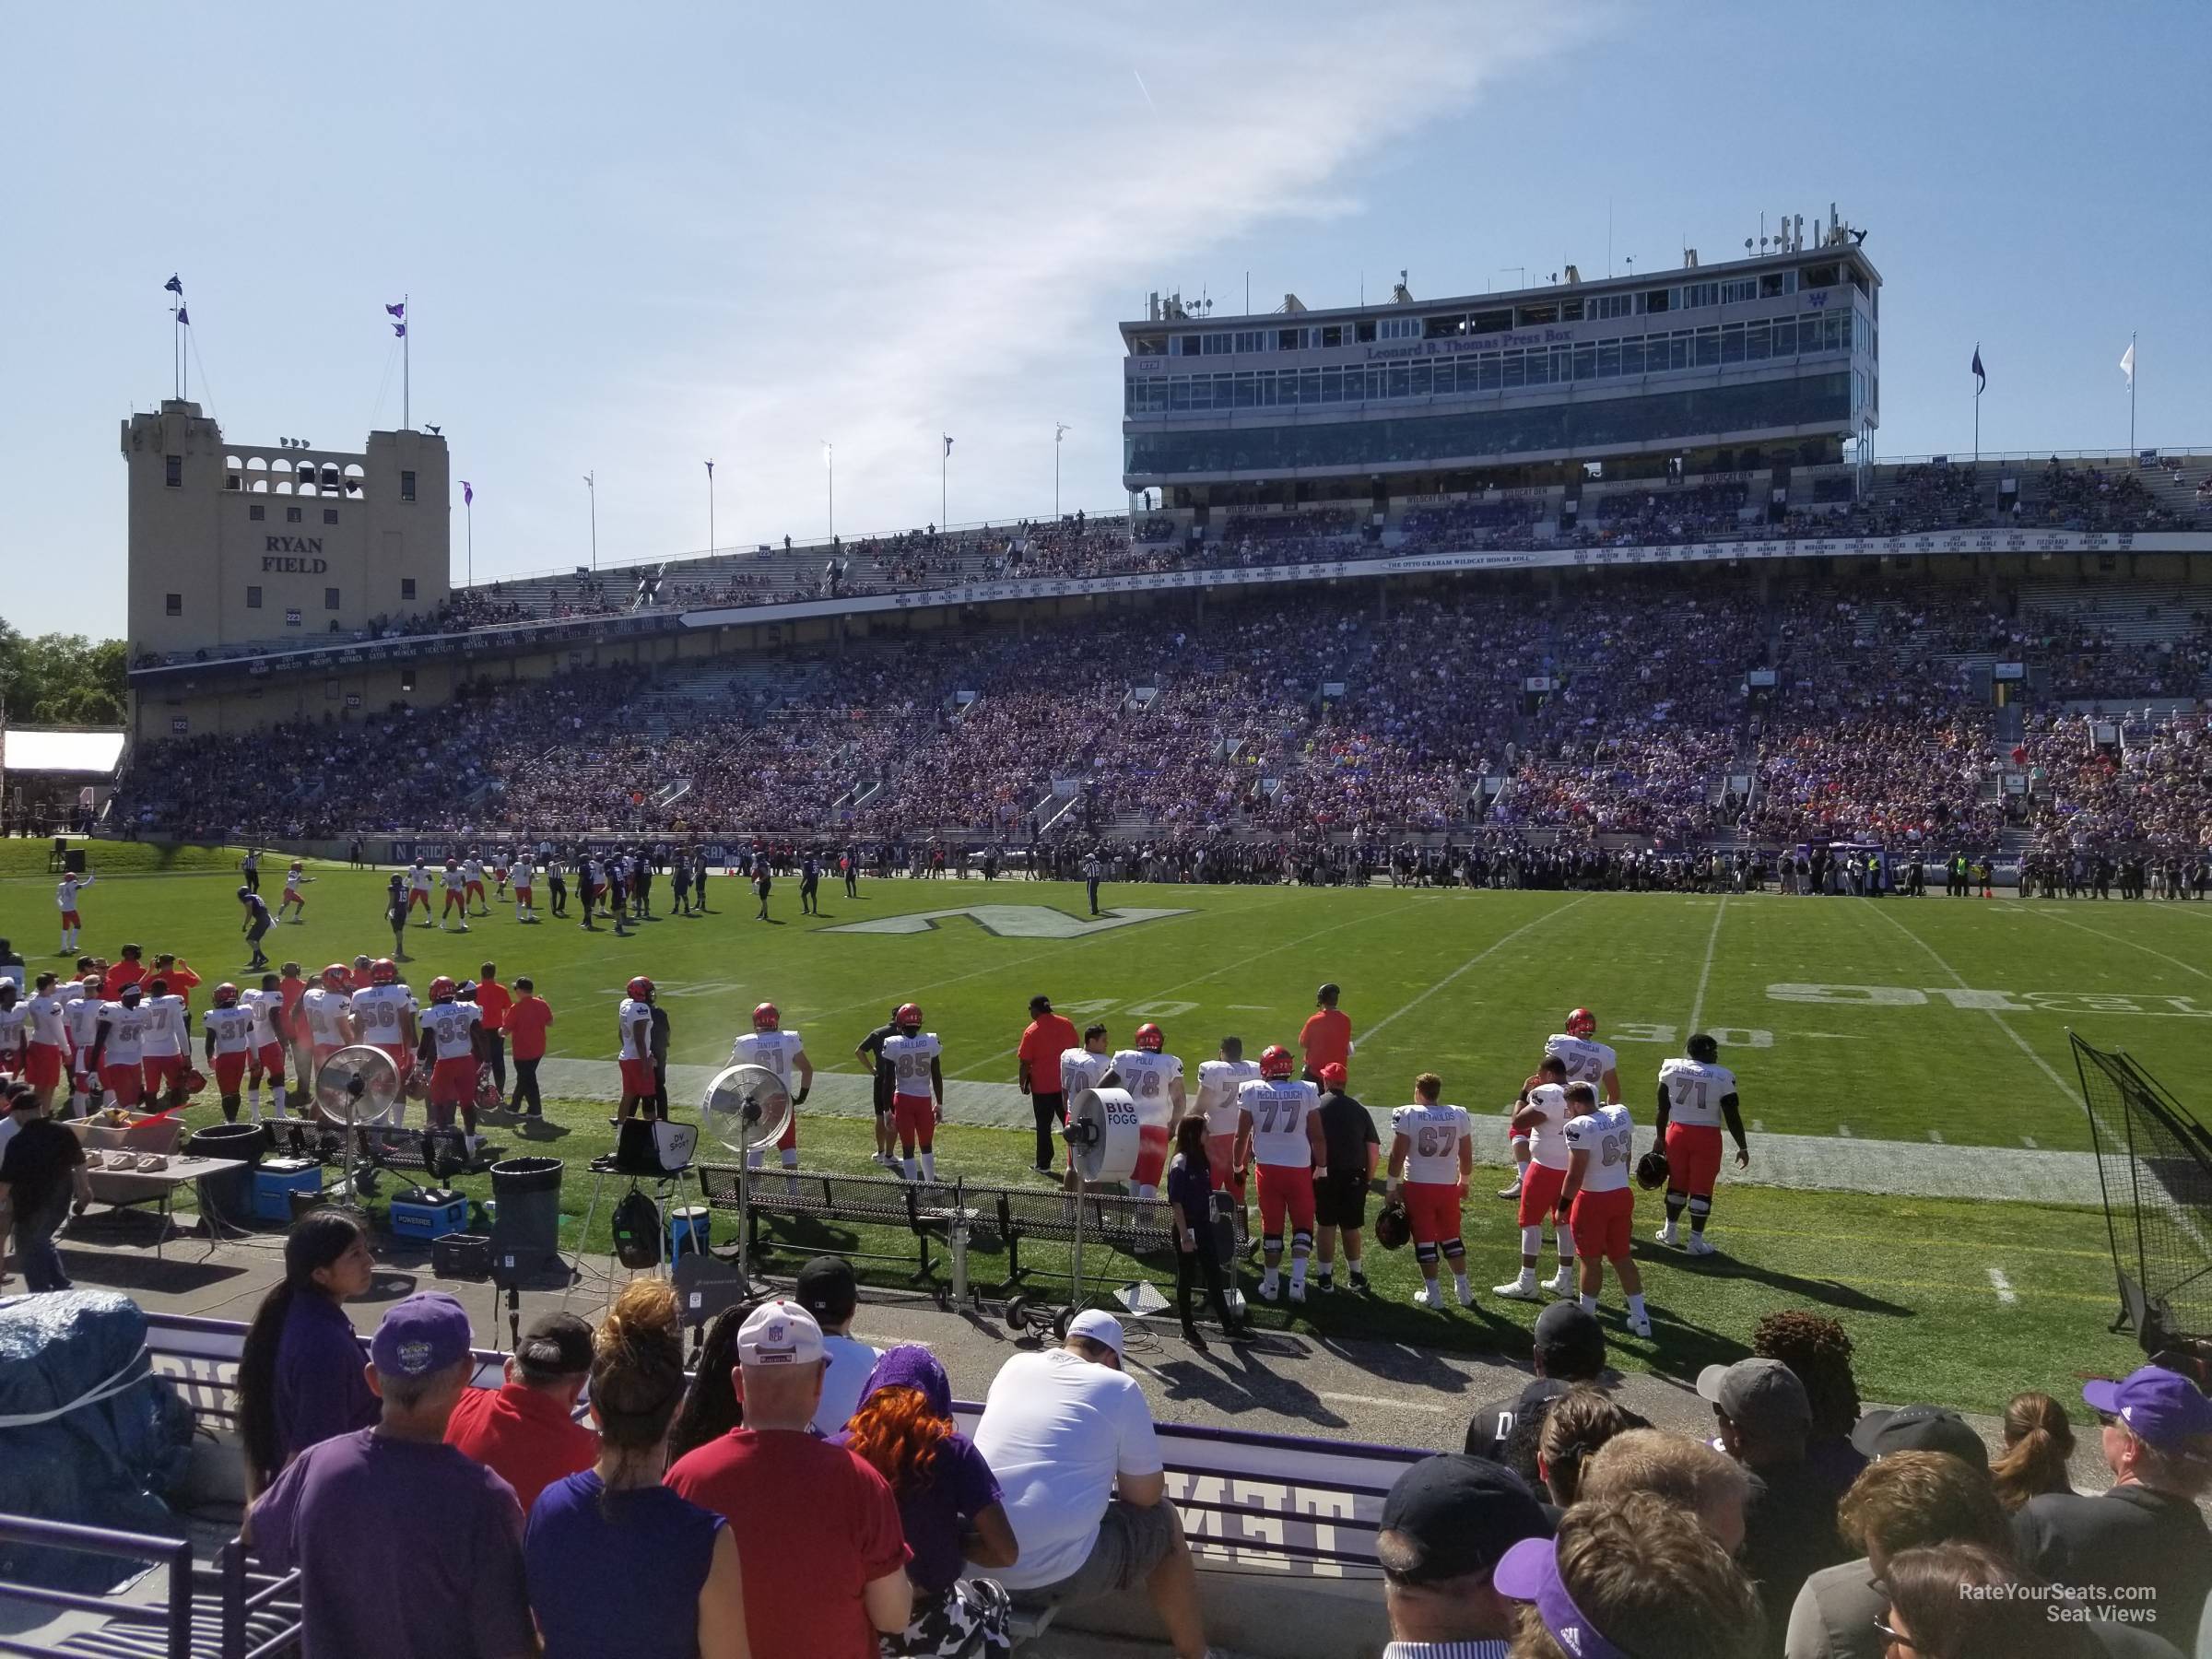 section 106, row 8 seat view  - ryan field